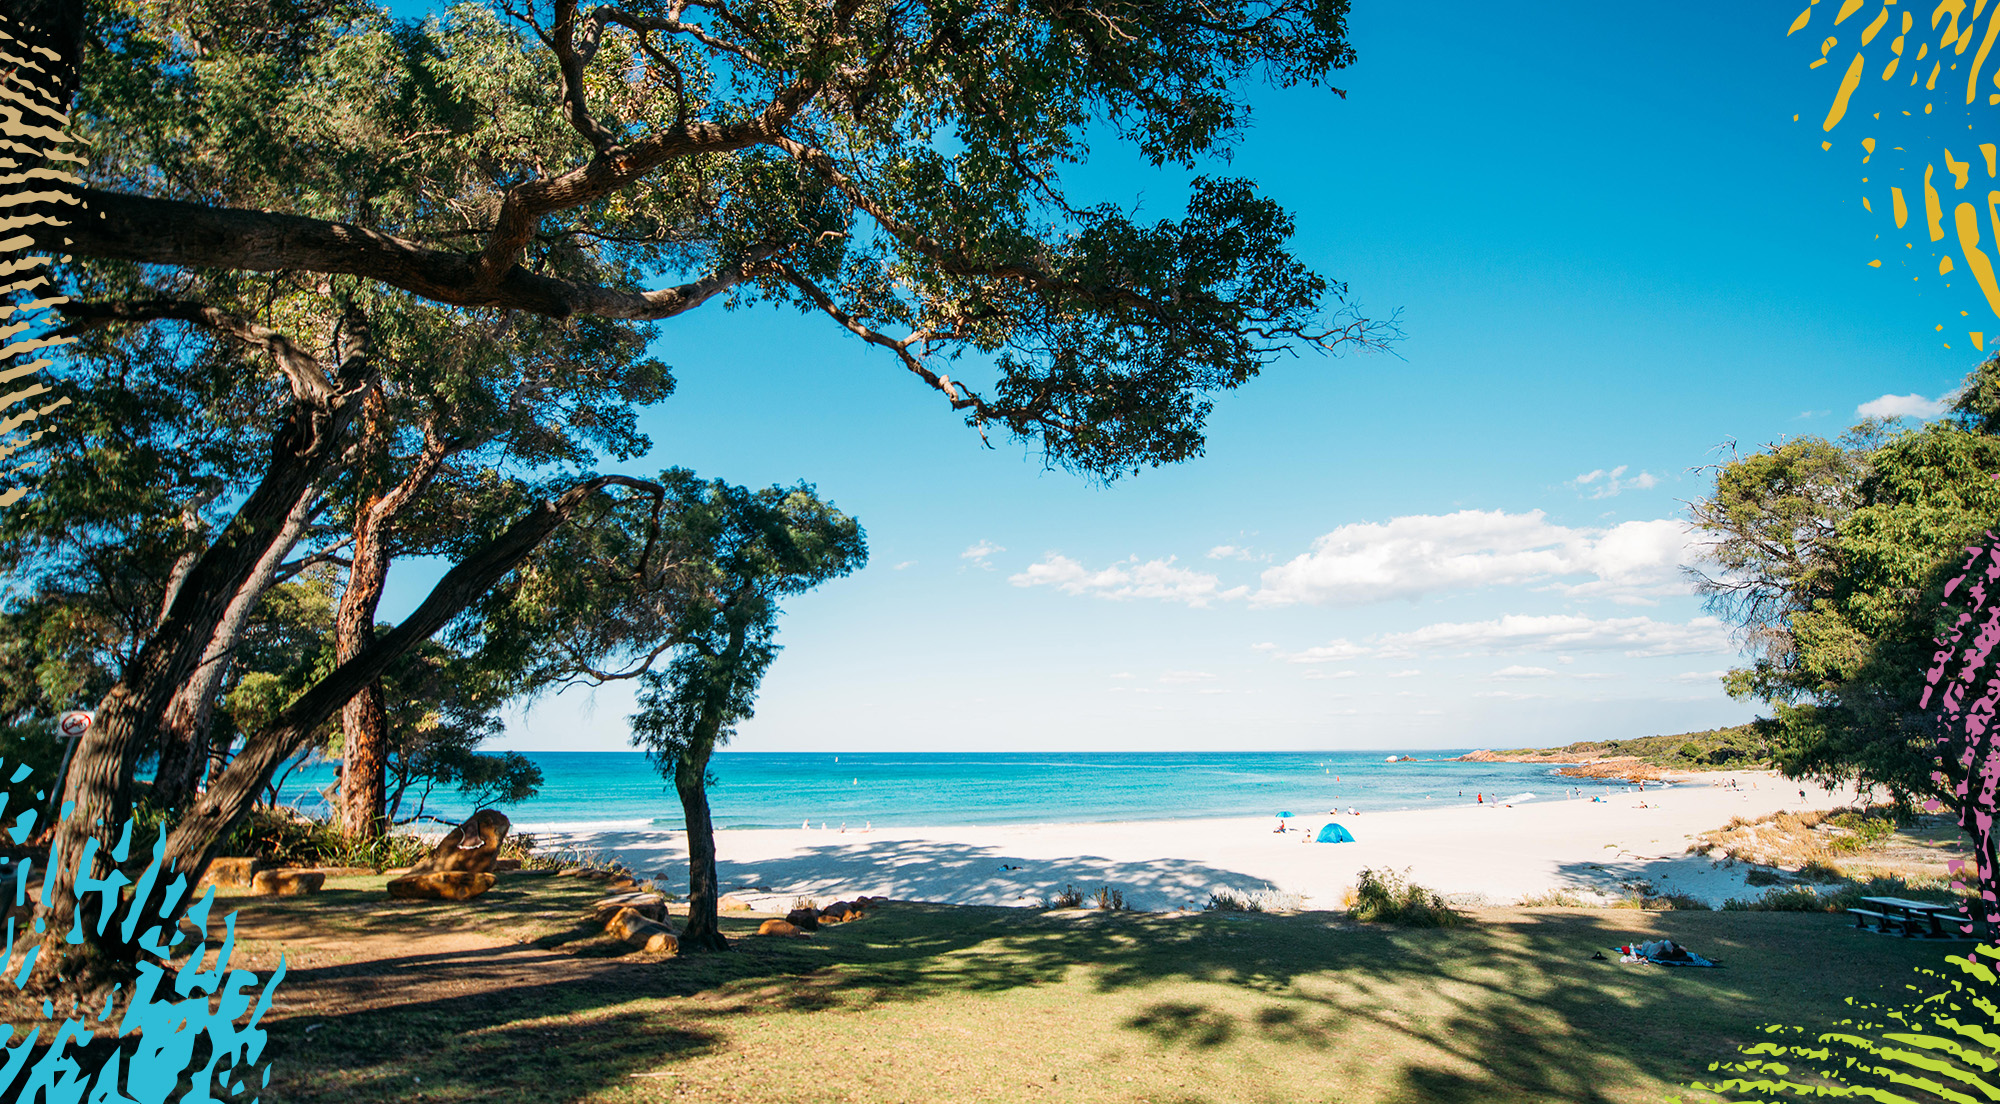 Consumer giveaway, family friendly wineries & more… catch up on the action at margaretriver.com!